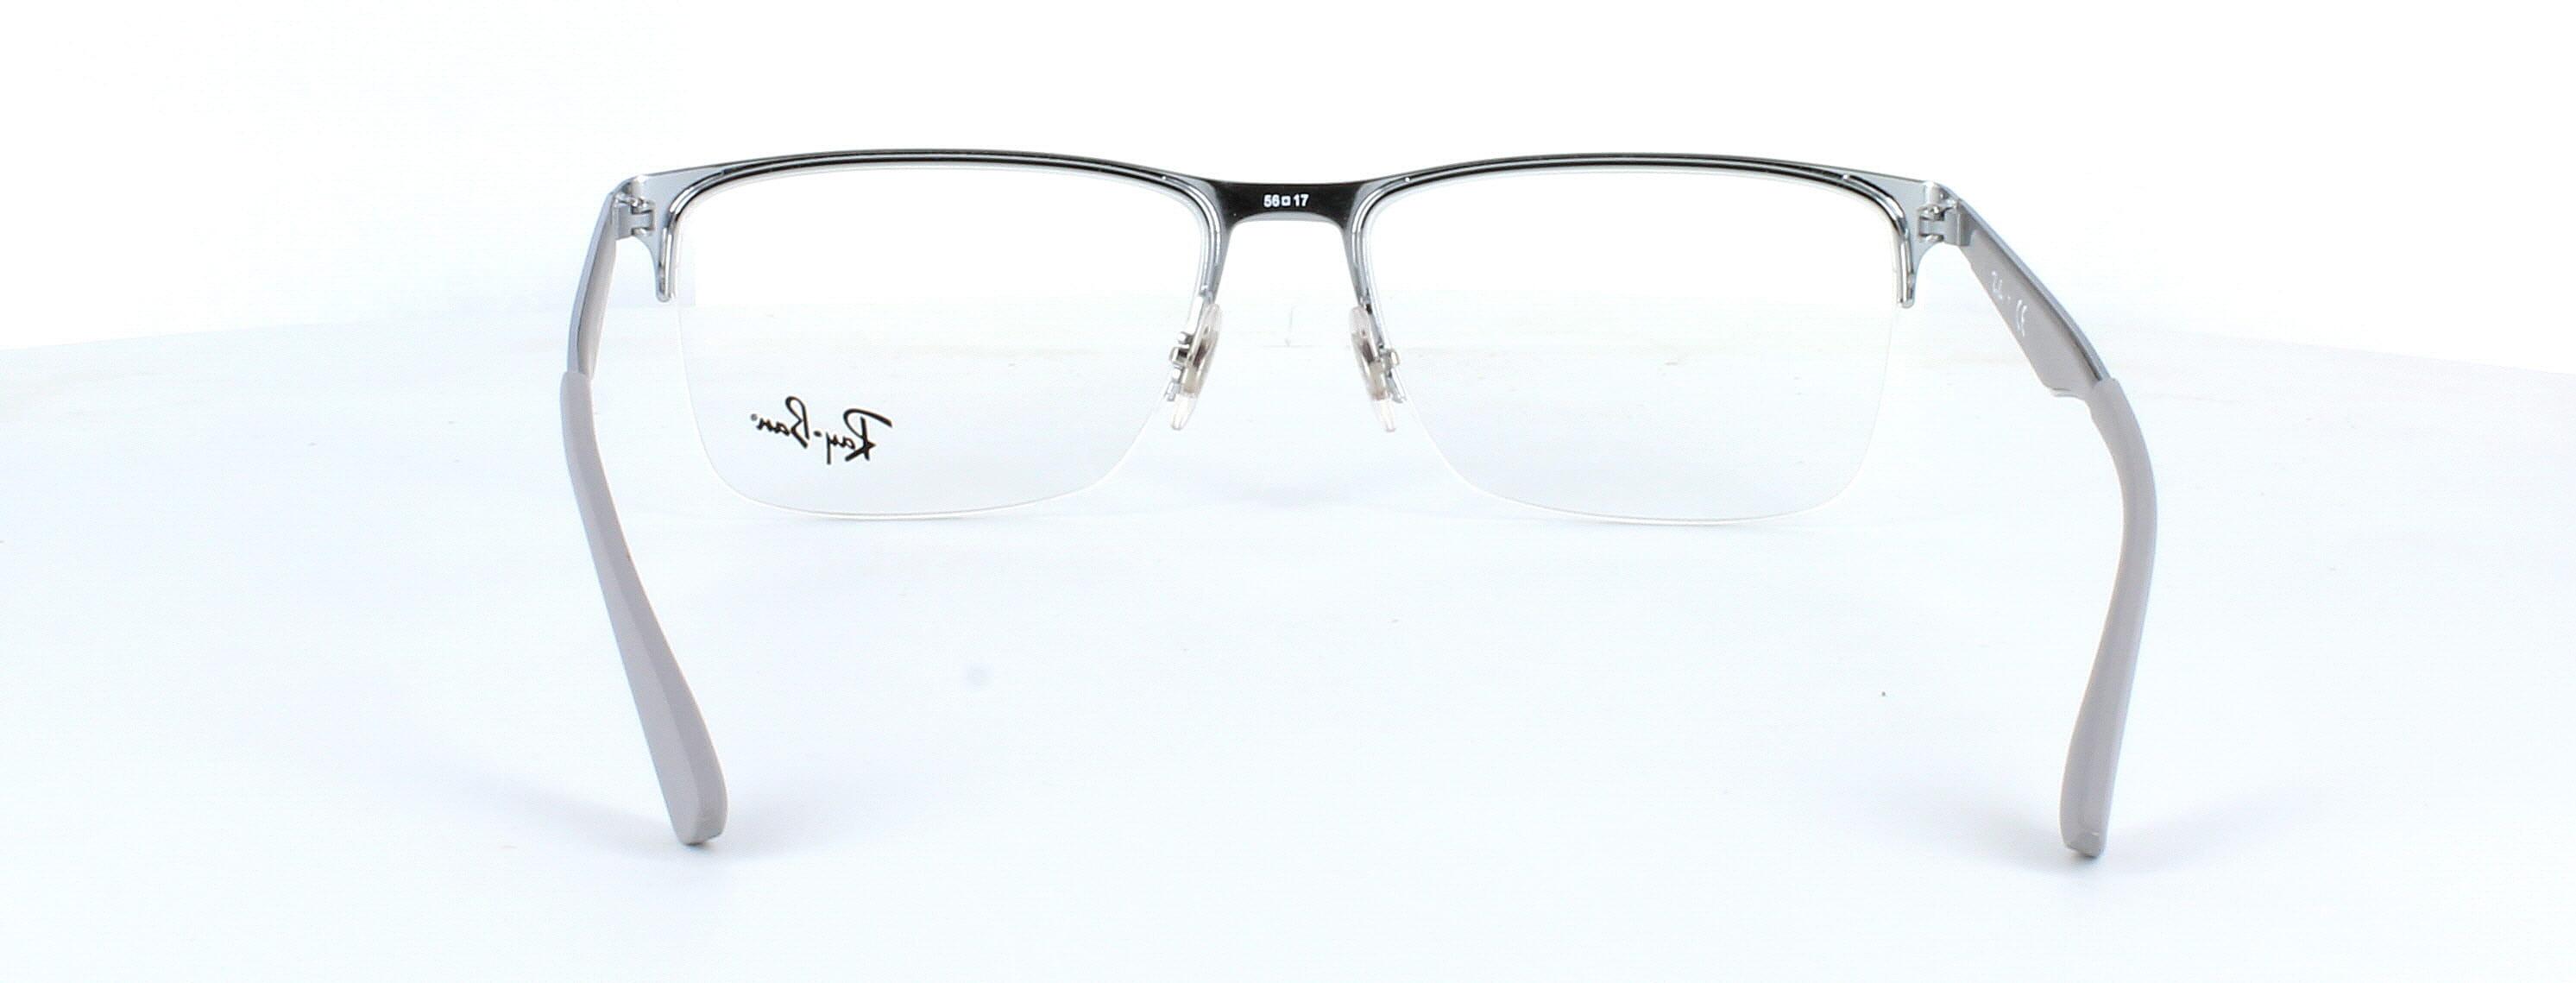 Gents semi-rimless glasses in bronze by Ray Ban - RB6335 - image 4